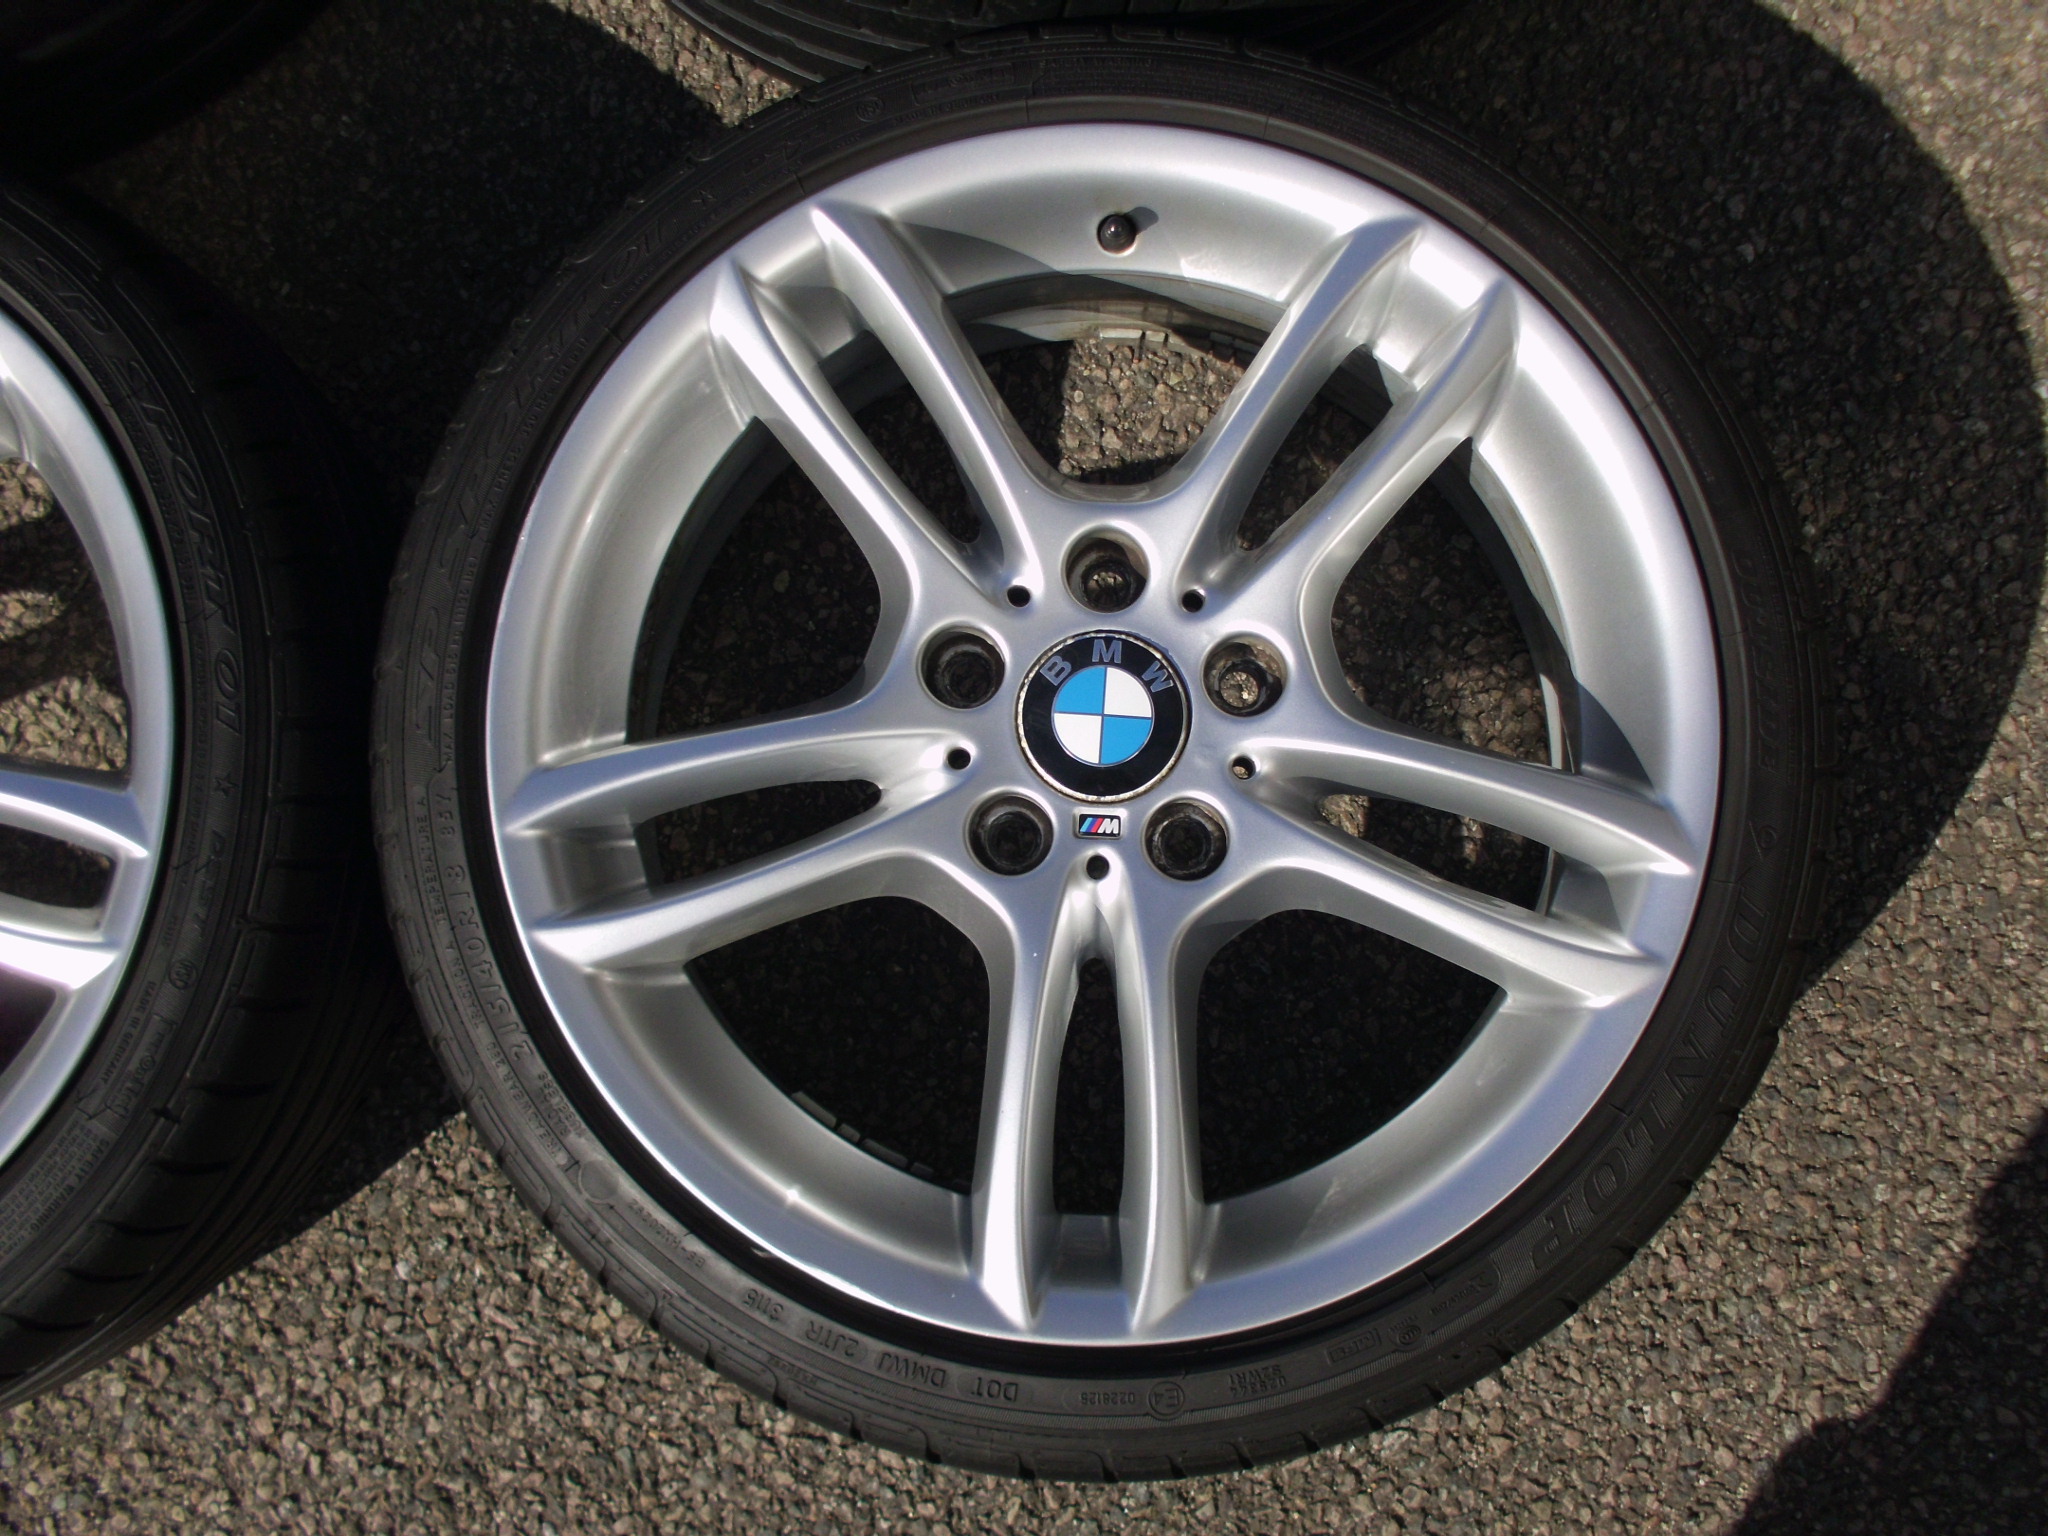 USED 18" GENUINE BMW STYLE 261 1 SERIES M SPORT ALLOY WHEELS,WIDE REAR, GC, FULL INC GOOD RUNFLAT TYRES